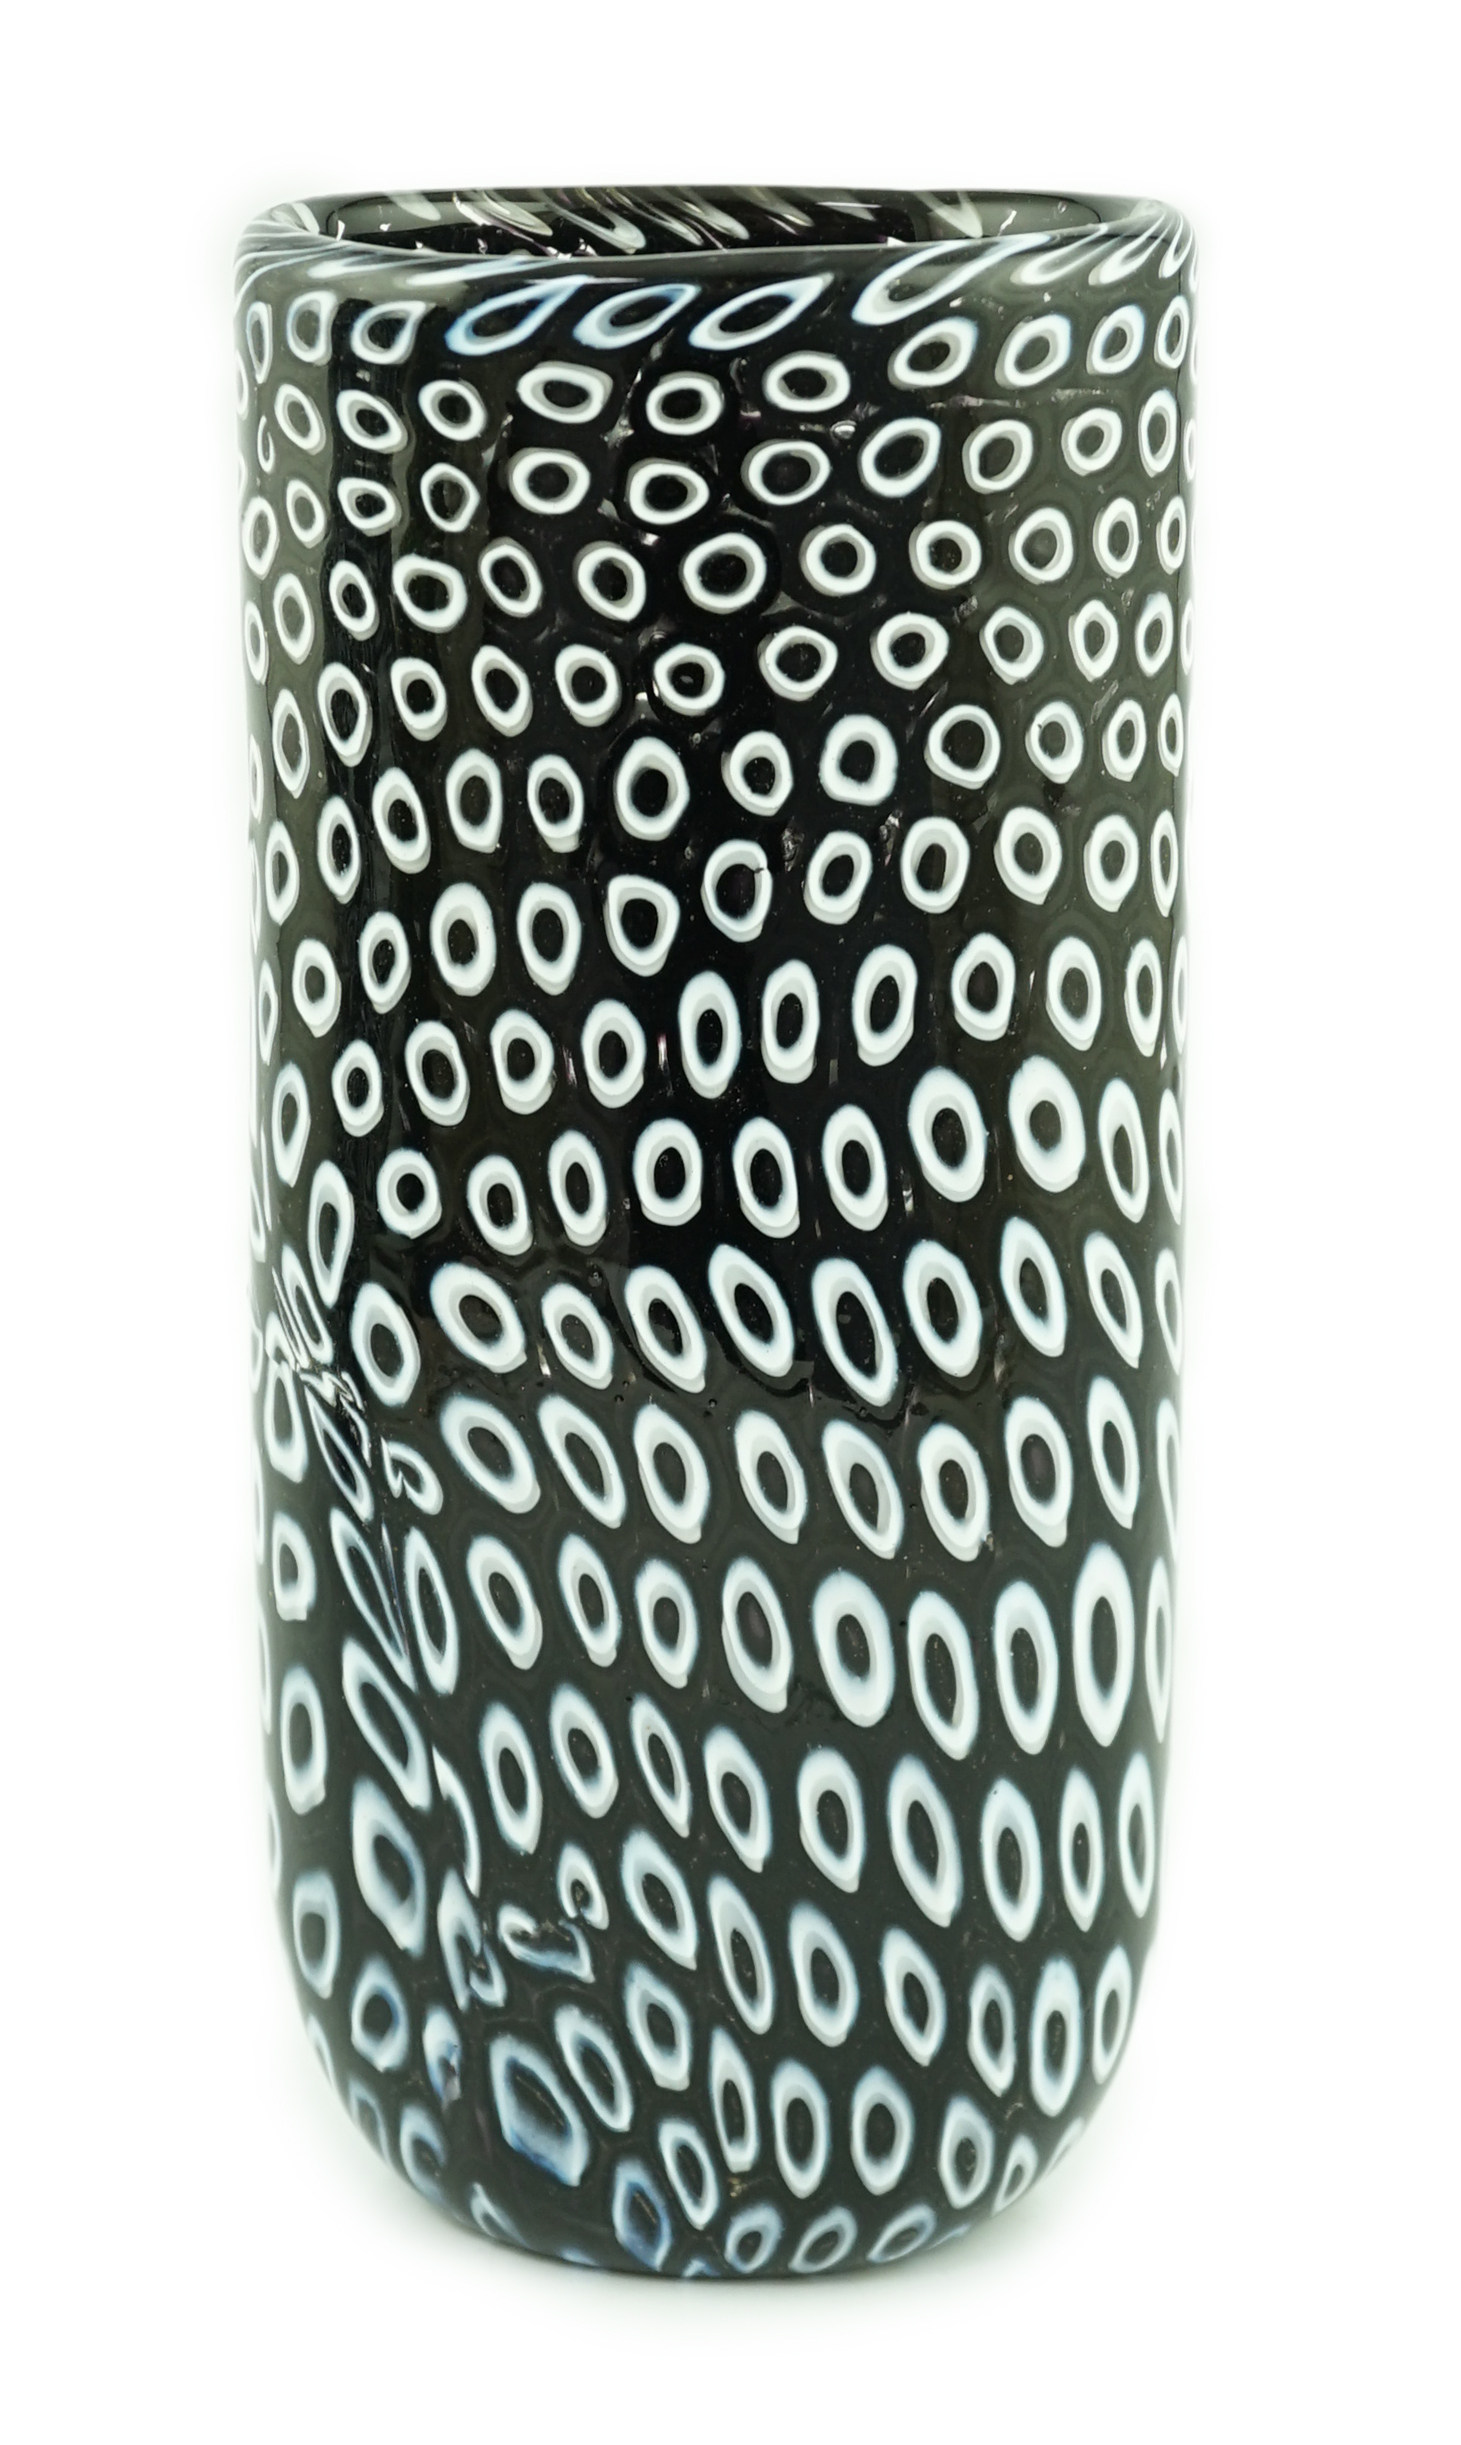 Vittorio Ferro (1932-2012) A Murano glass Murrine vase, with a white on black peacock feather ‘’eye’’ design, unsigned, 28cm, Please note this lot attracts an additional import tax of 20% on the hammer price